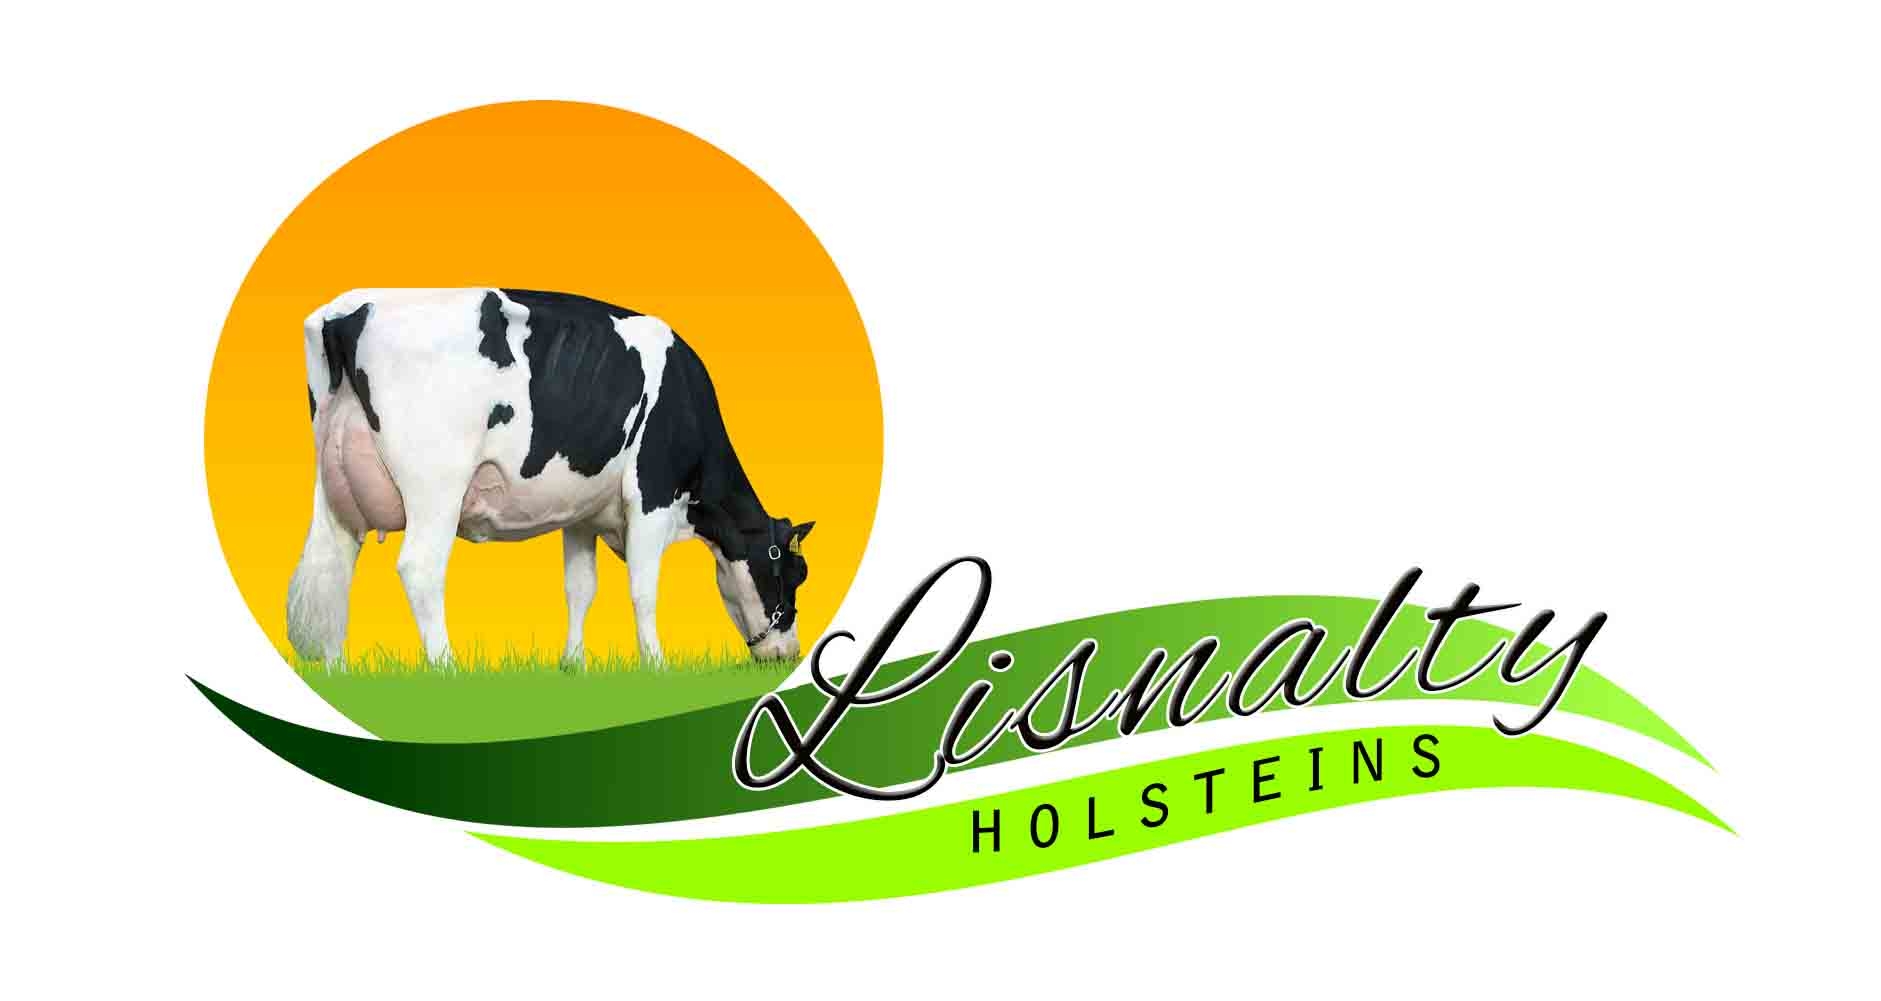 products-lisnalty_holsteins_logolr